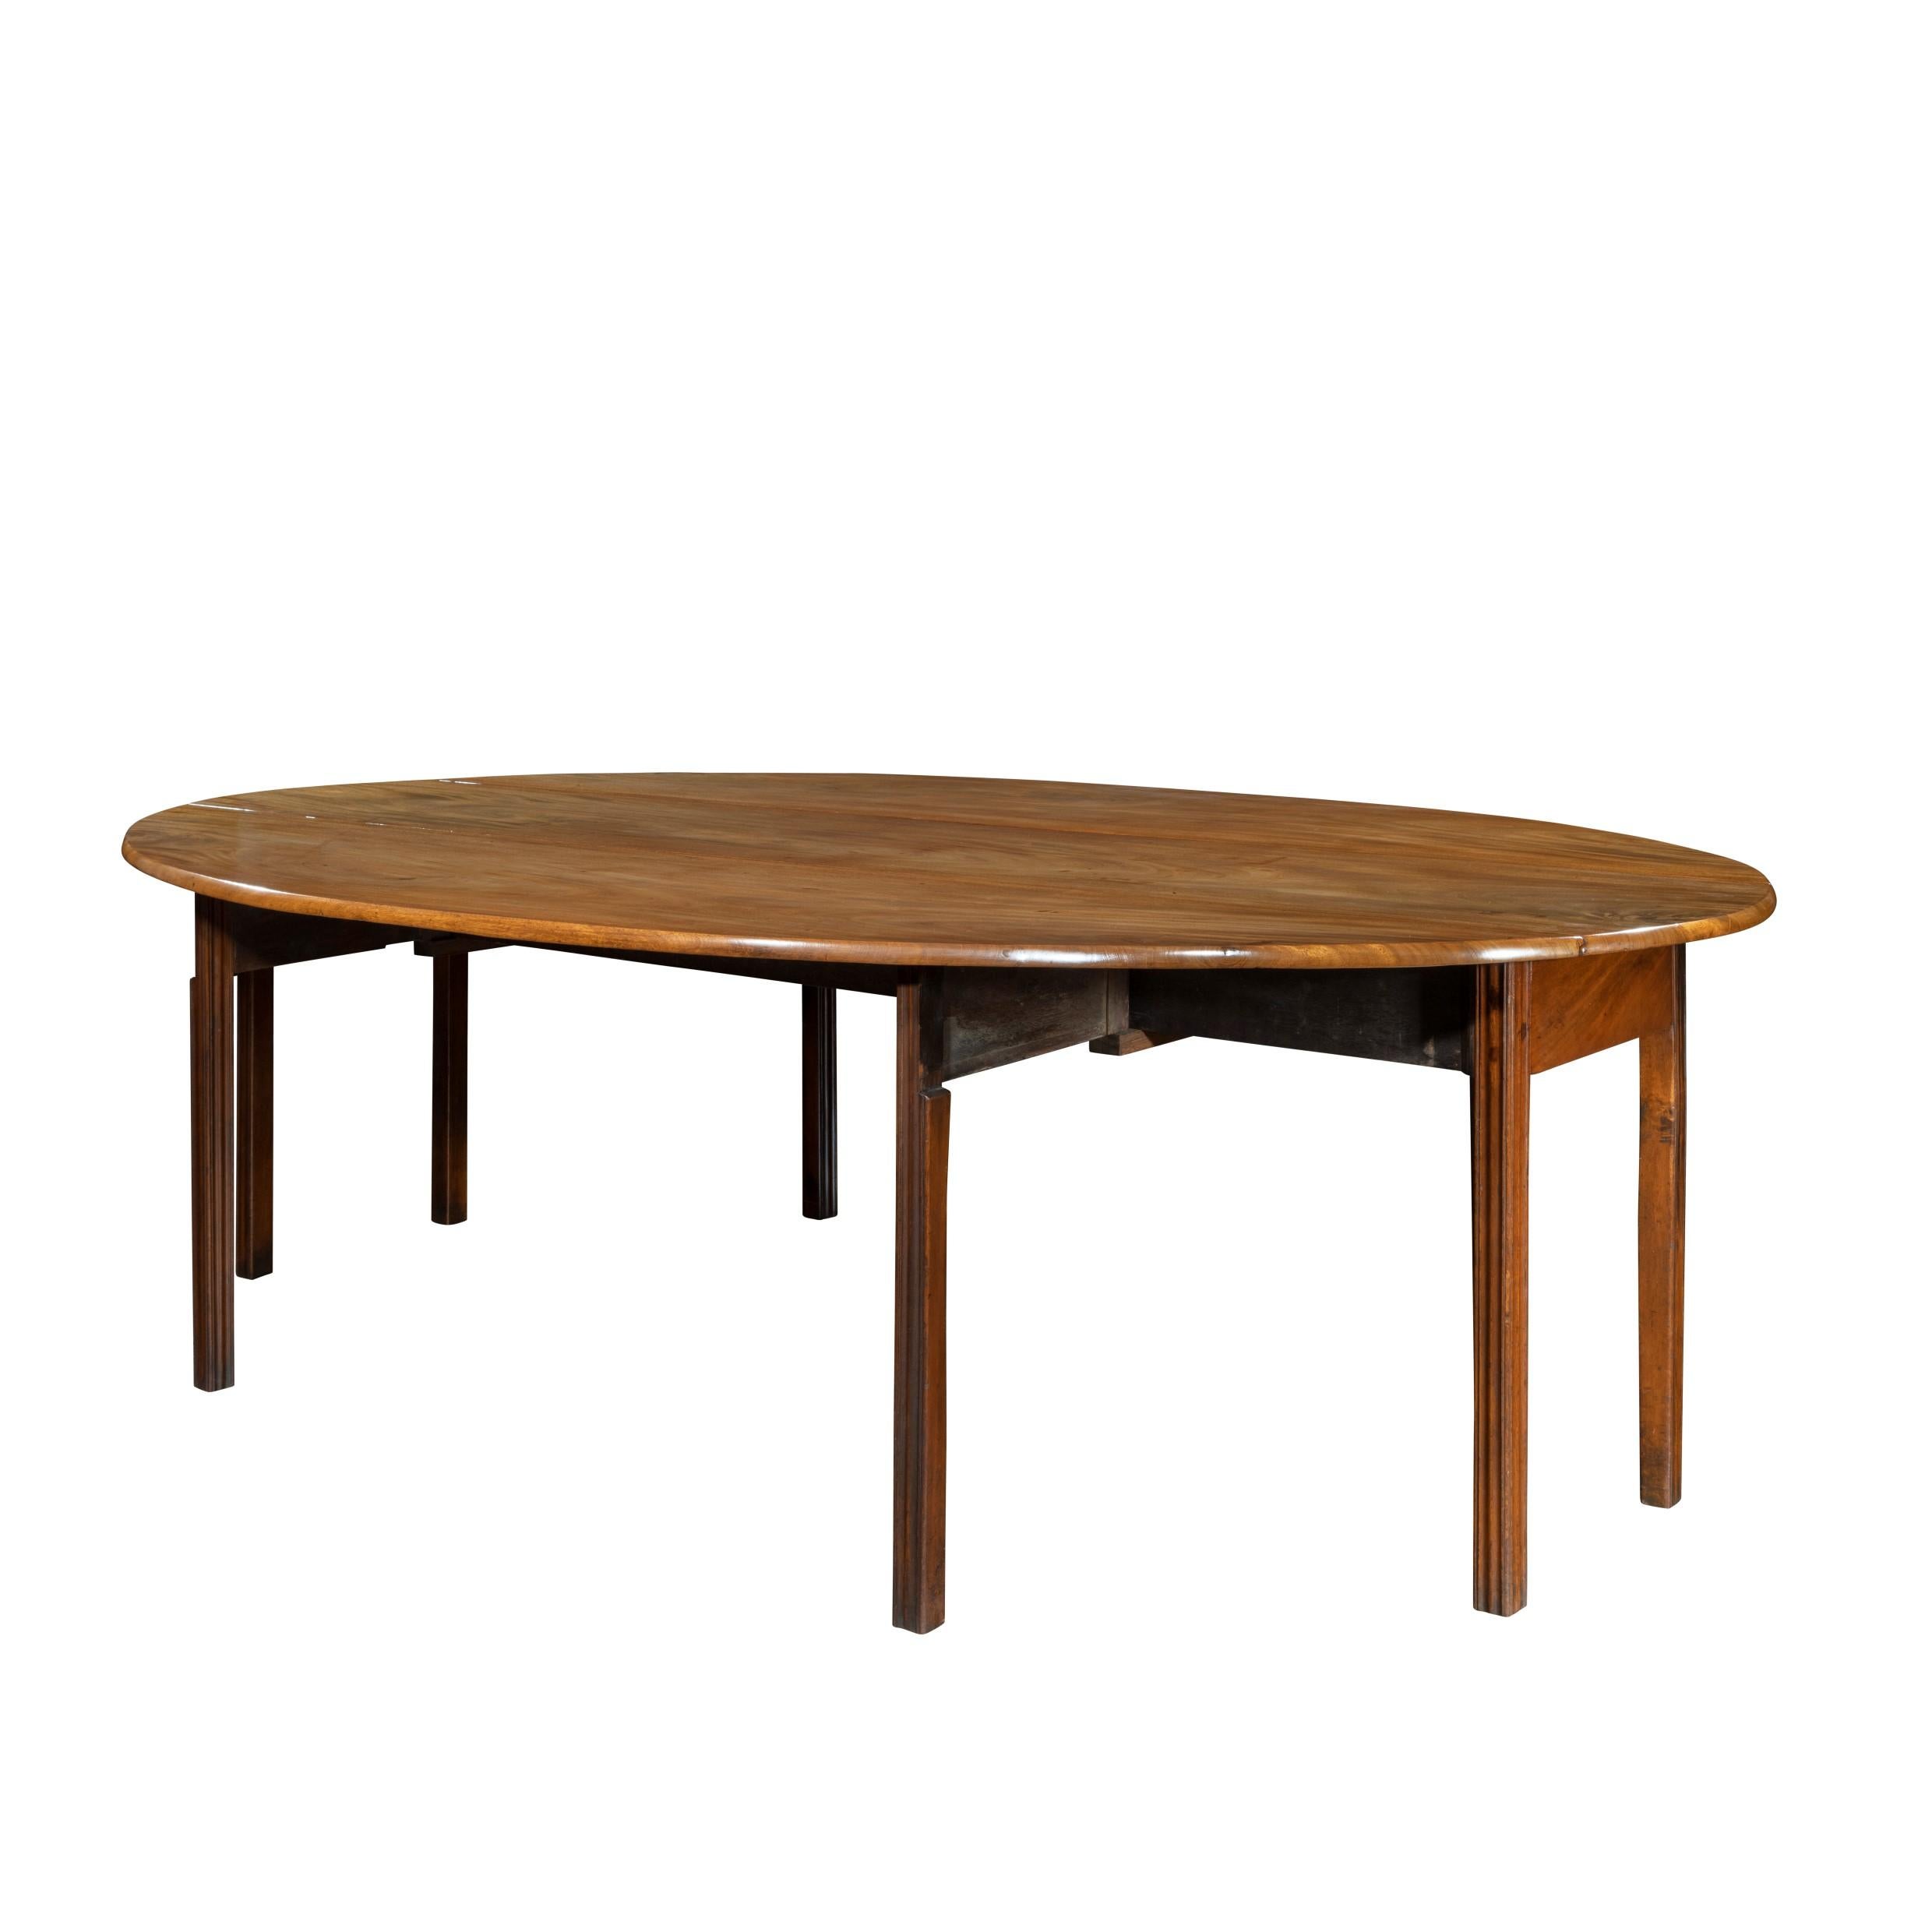 A long early George III Irish mahogany dining or wake table of exceptional colour, the highly figured veneered oval top with two drop flaps down over eight reeded gate legs, seats 12, Irish, circa 1760.
 
Measures: H 28 ½ in W open 62 in closed